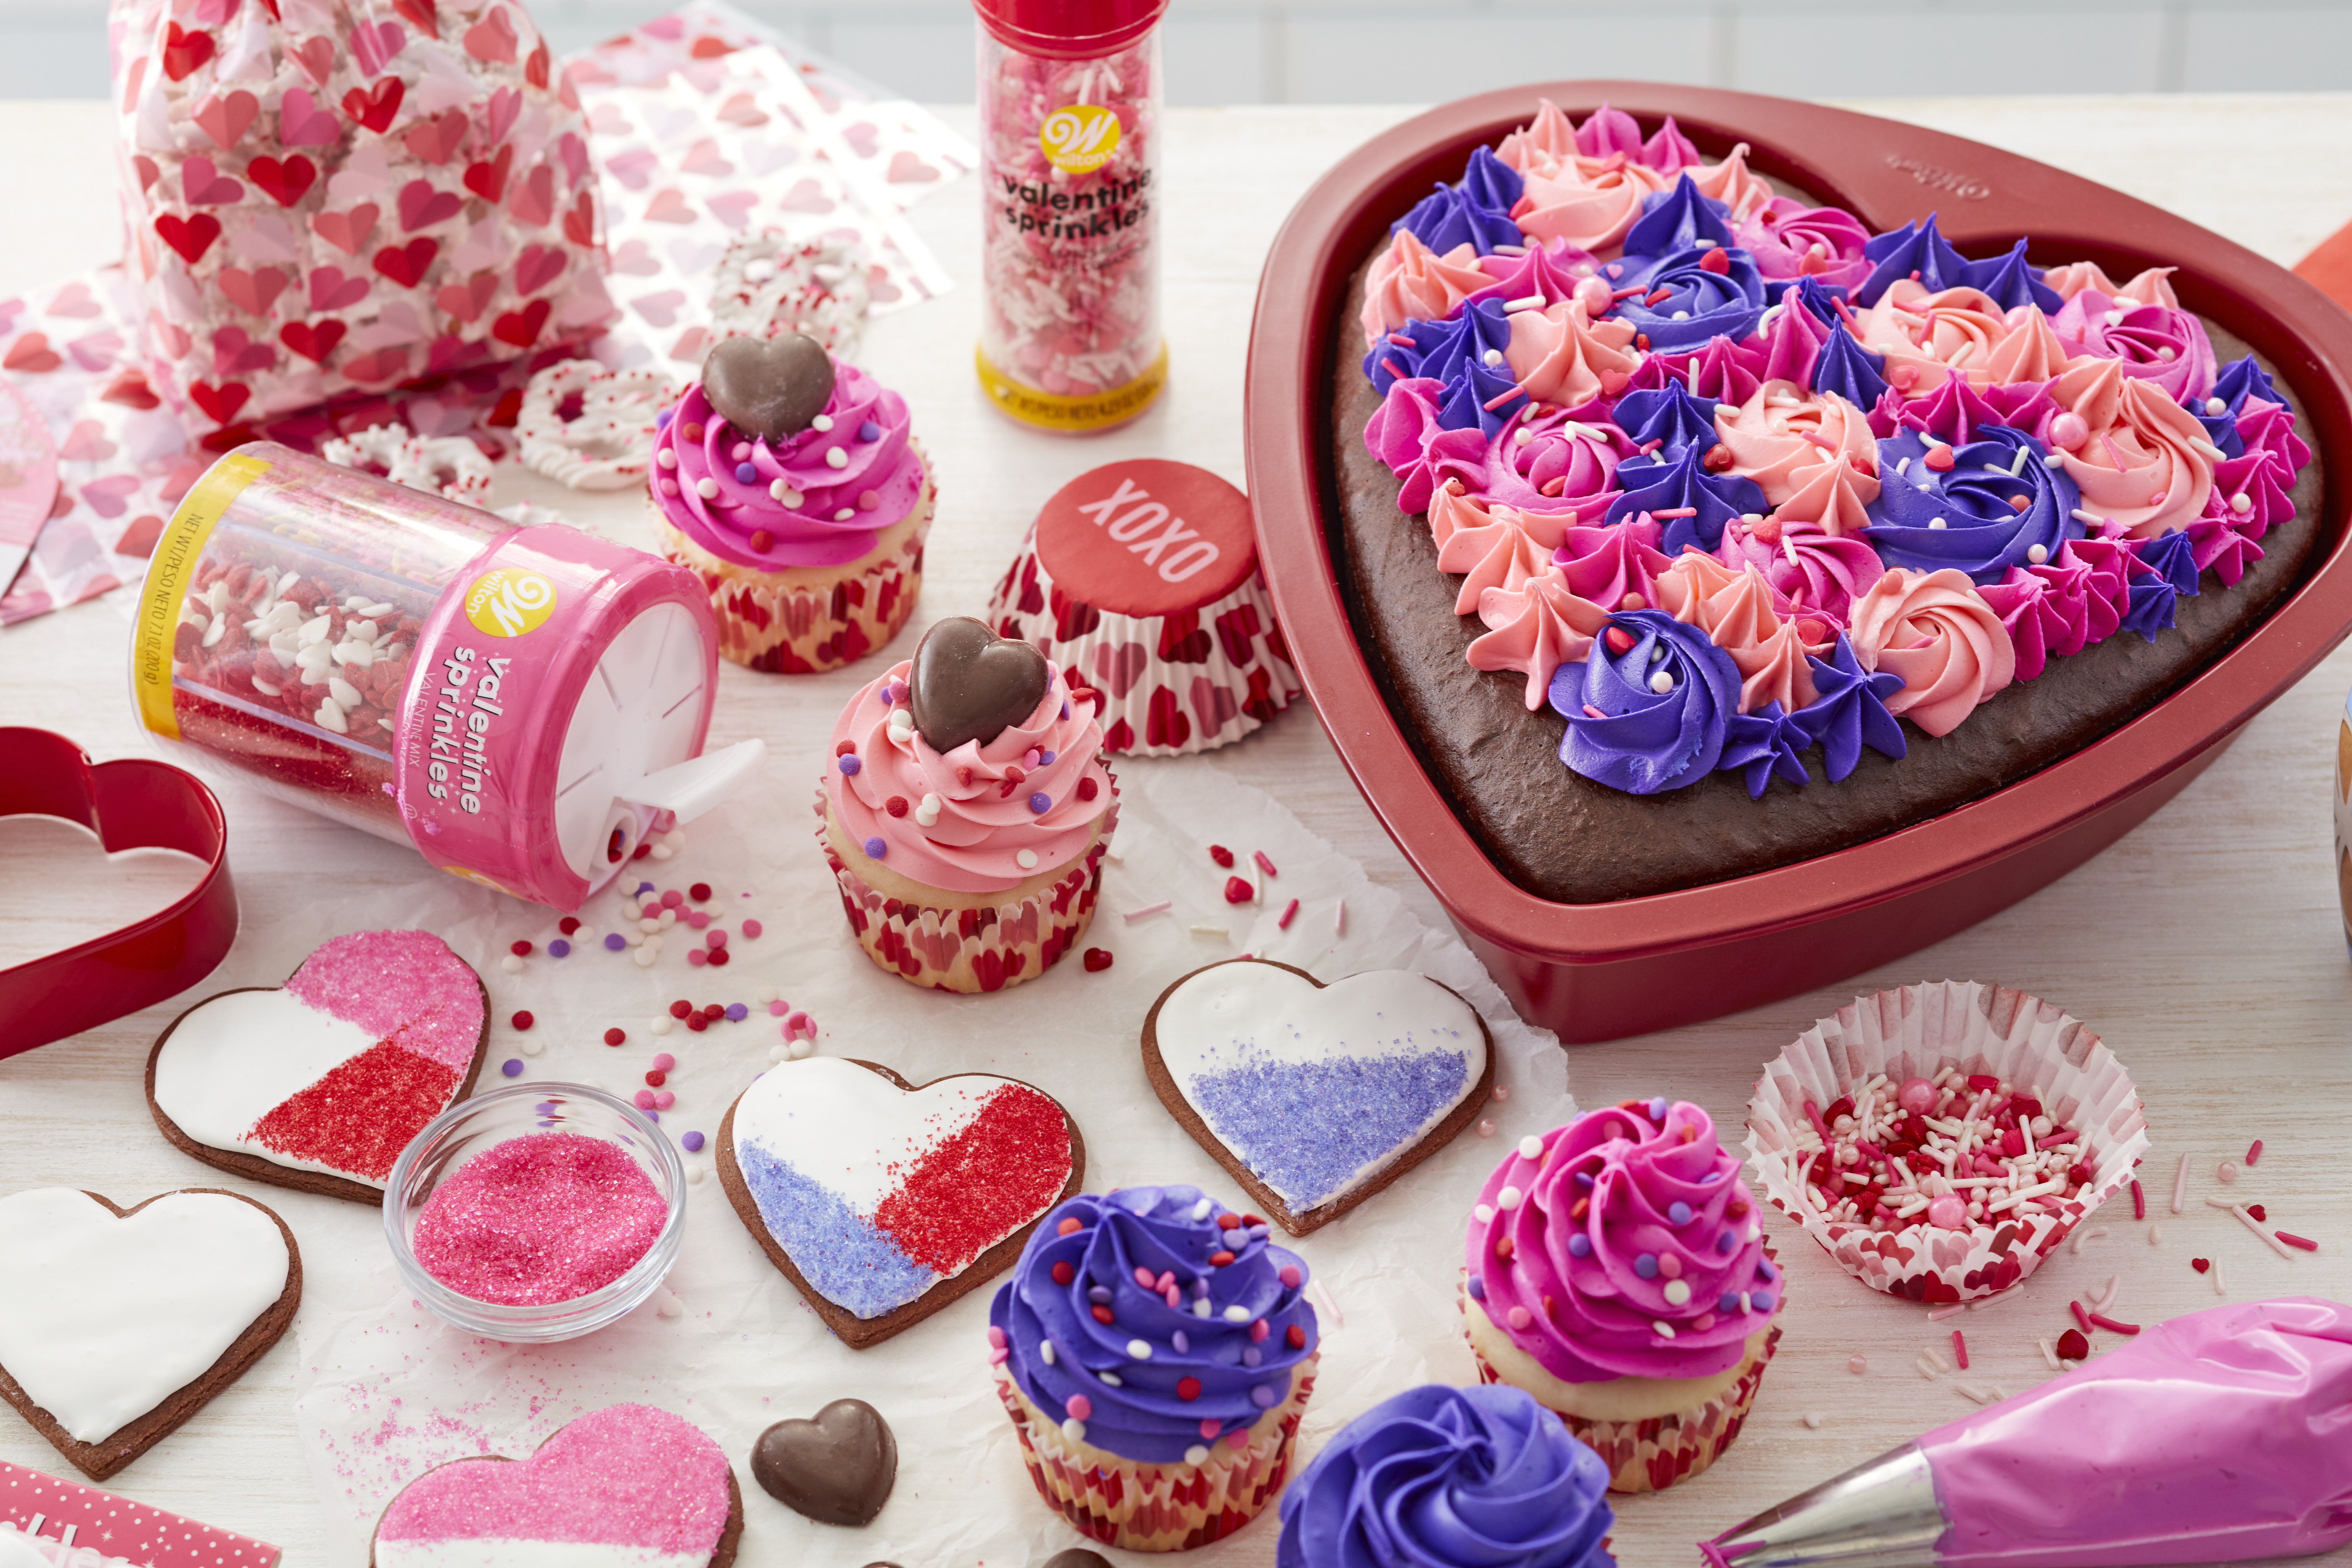 Wilton is inspiring consumers to bake with love on the sweetest holiday of the year with fun seasonal products, fan-favorite tools and adorable dessert toppings